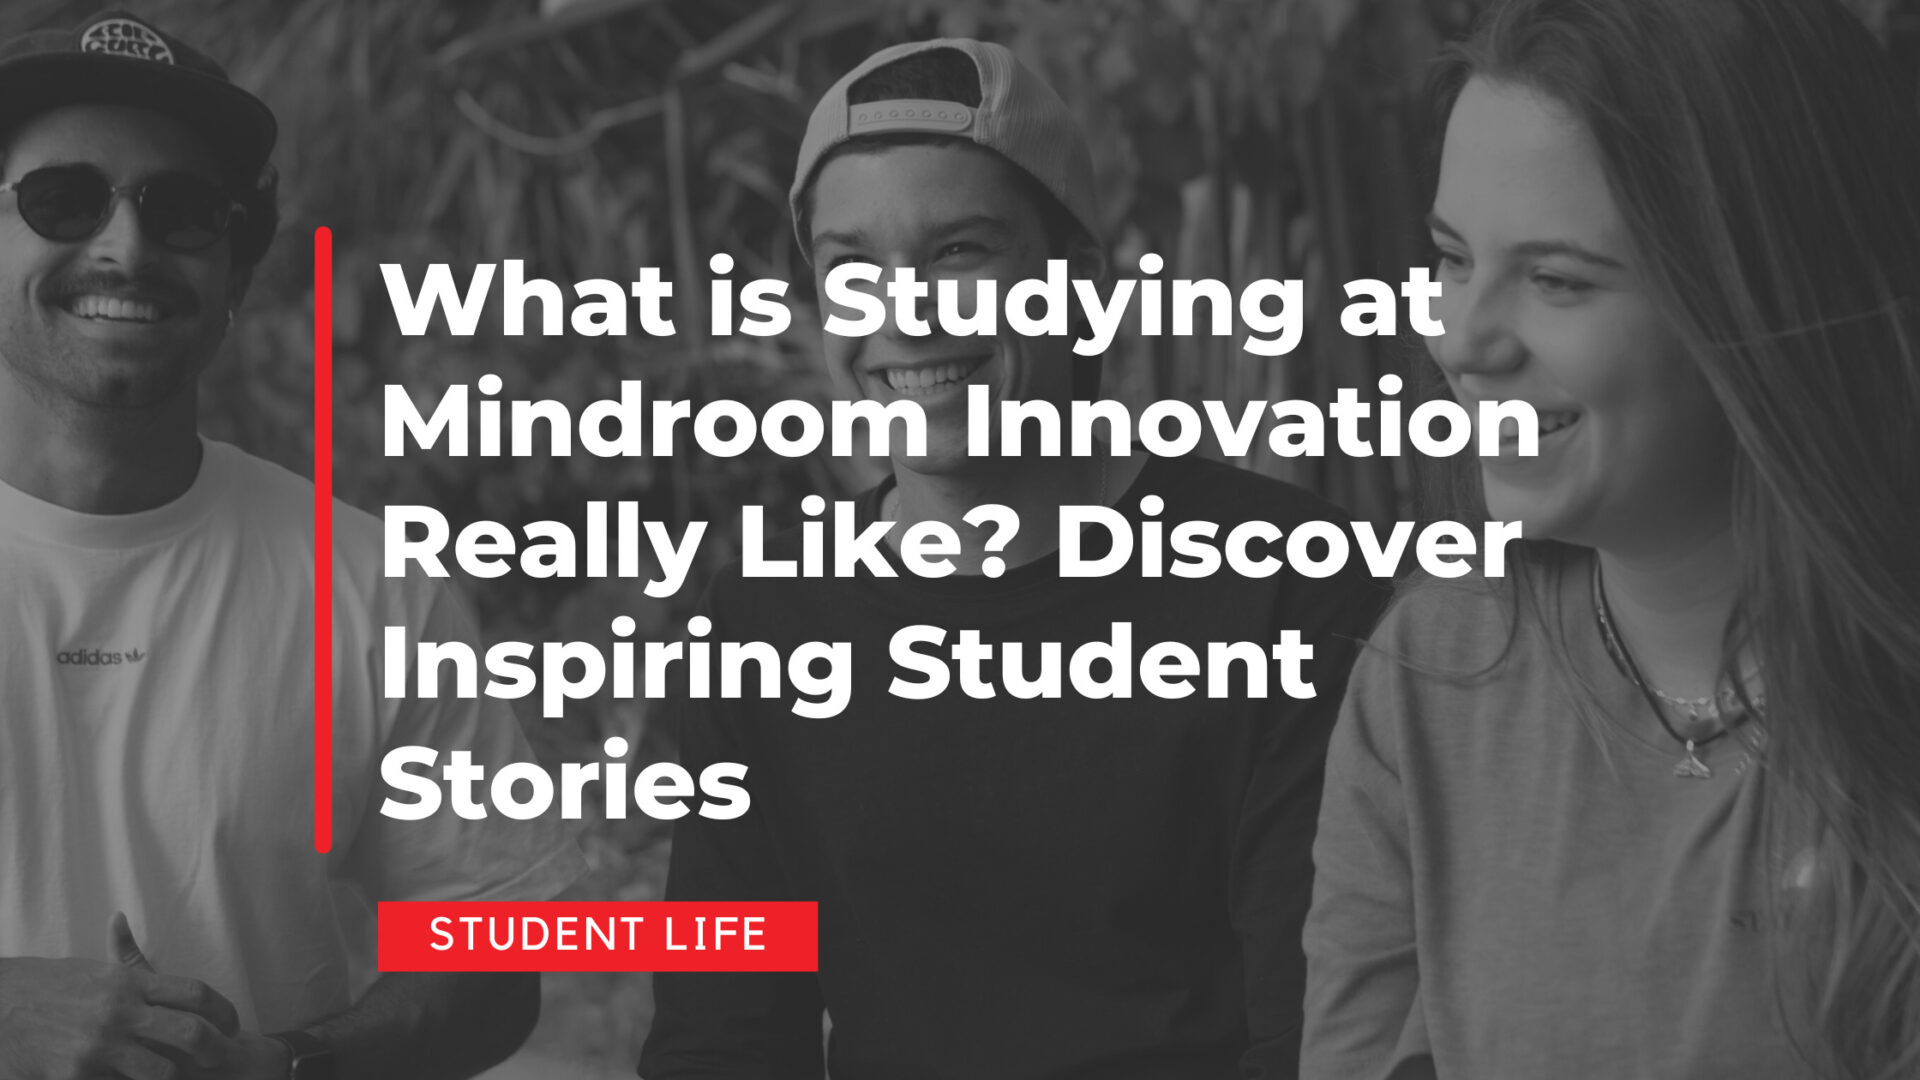 What is Studying at Mindroom Innovation Really Like? Discover Inspiring Student Stories